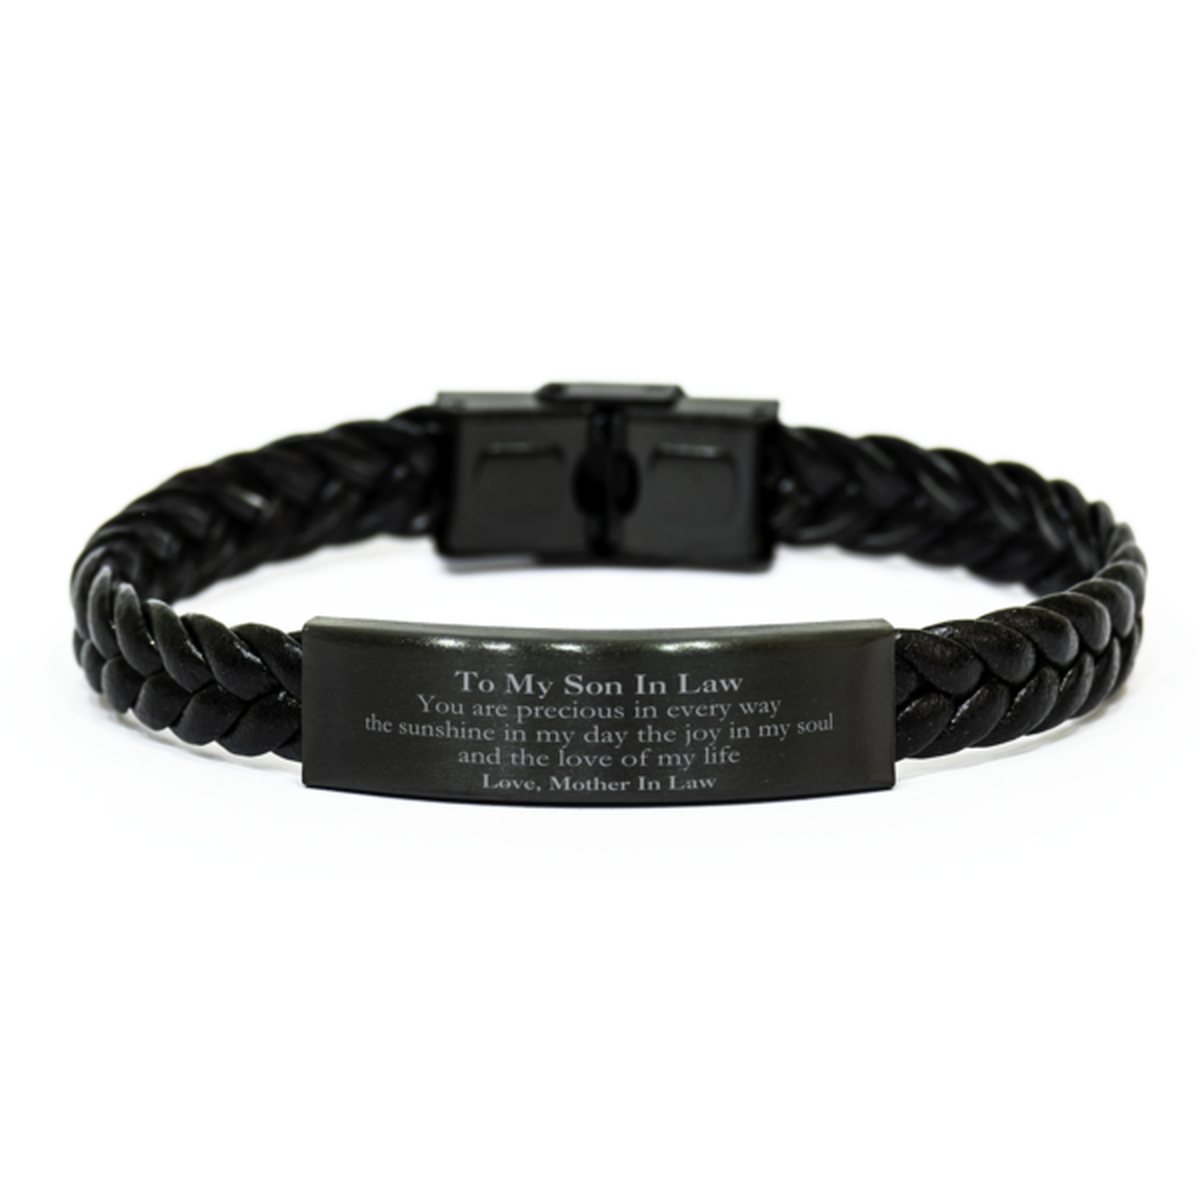 Graduation Gifts for Son In Law Braided Leather Bracelet Present from Mother In Law, Christmas Son In Law Birthday Gifts Son In Law You are precious in every way the sunshine in my day. Love, Mother In Law